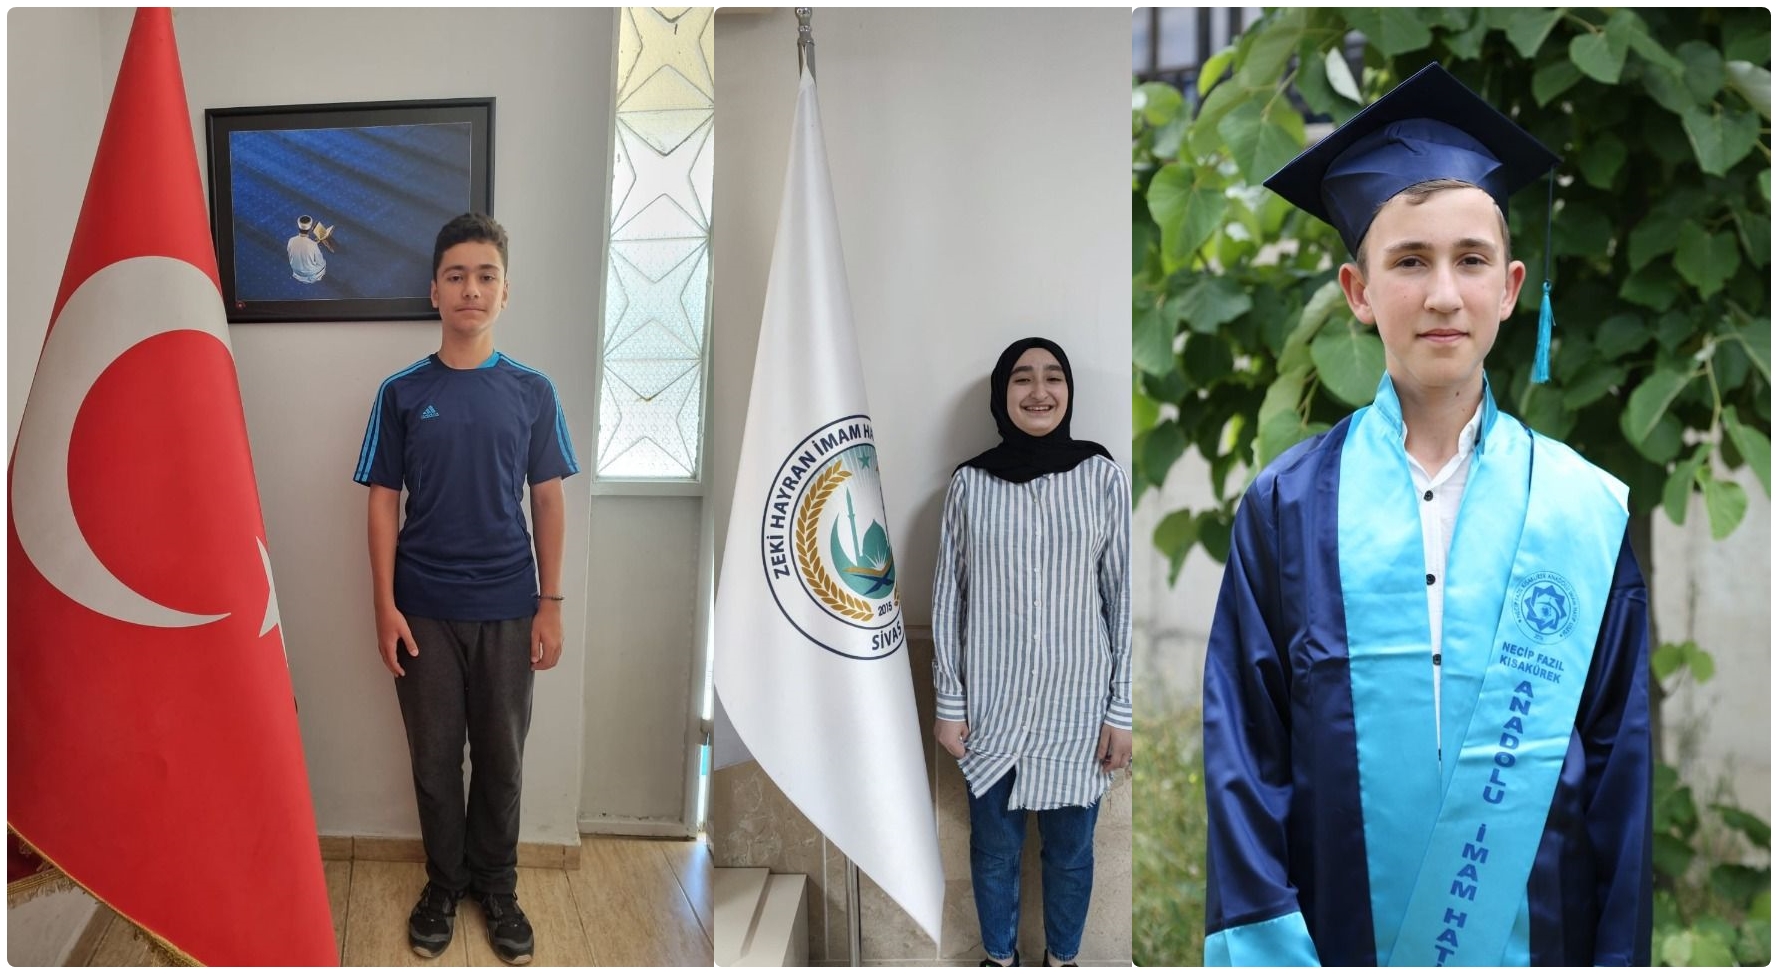 Imam Hatip students achieve great success in High School Transition System exam